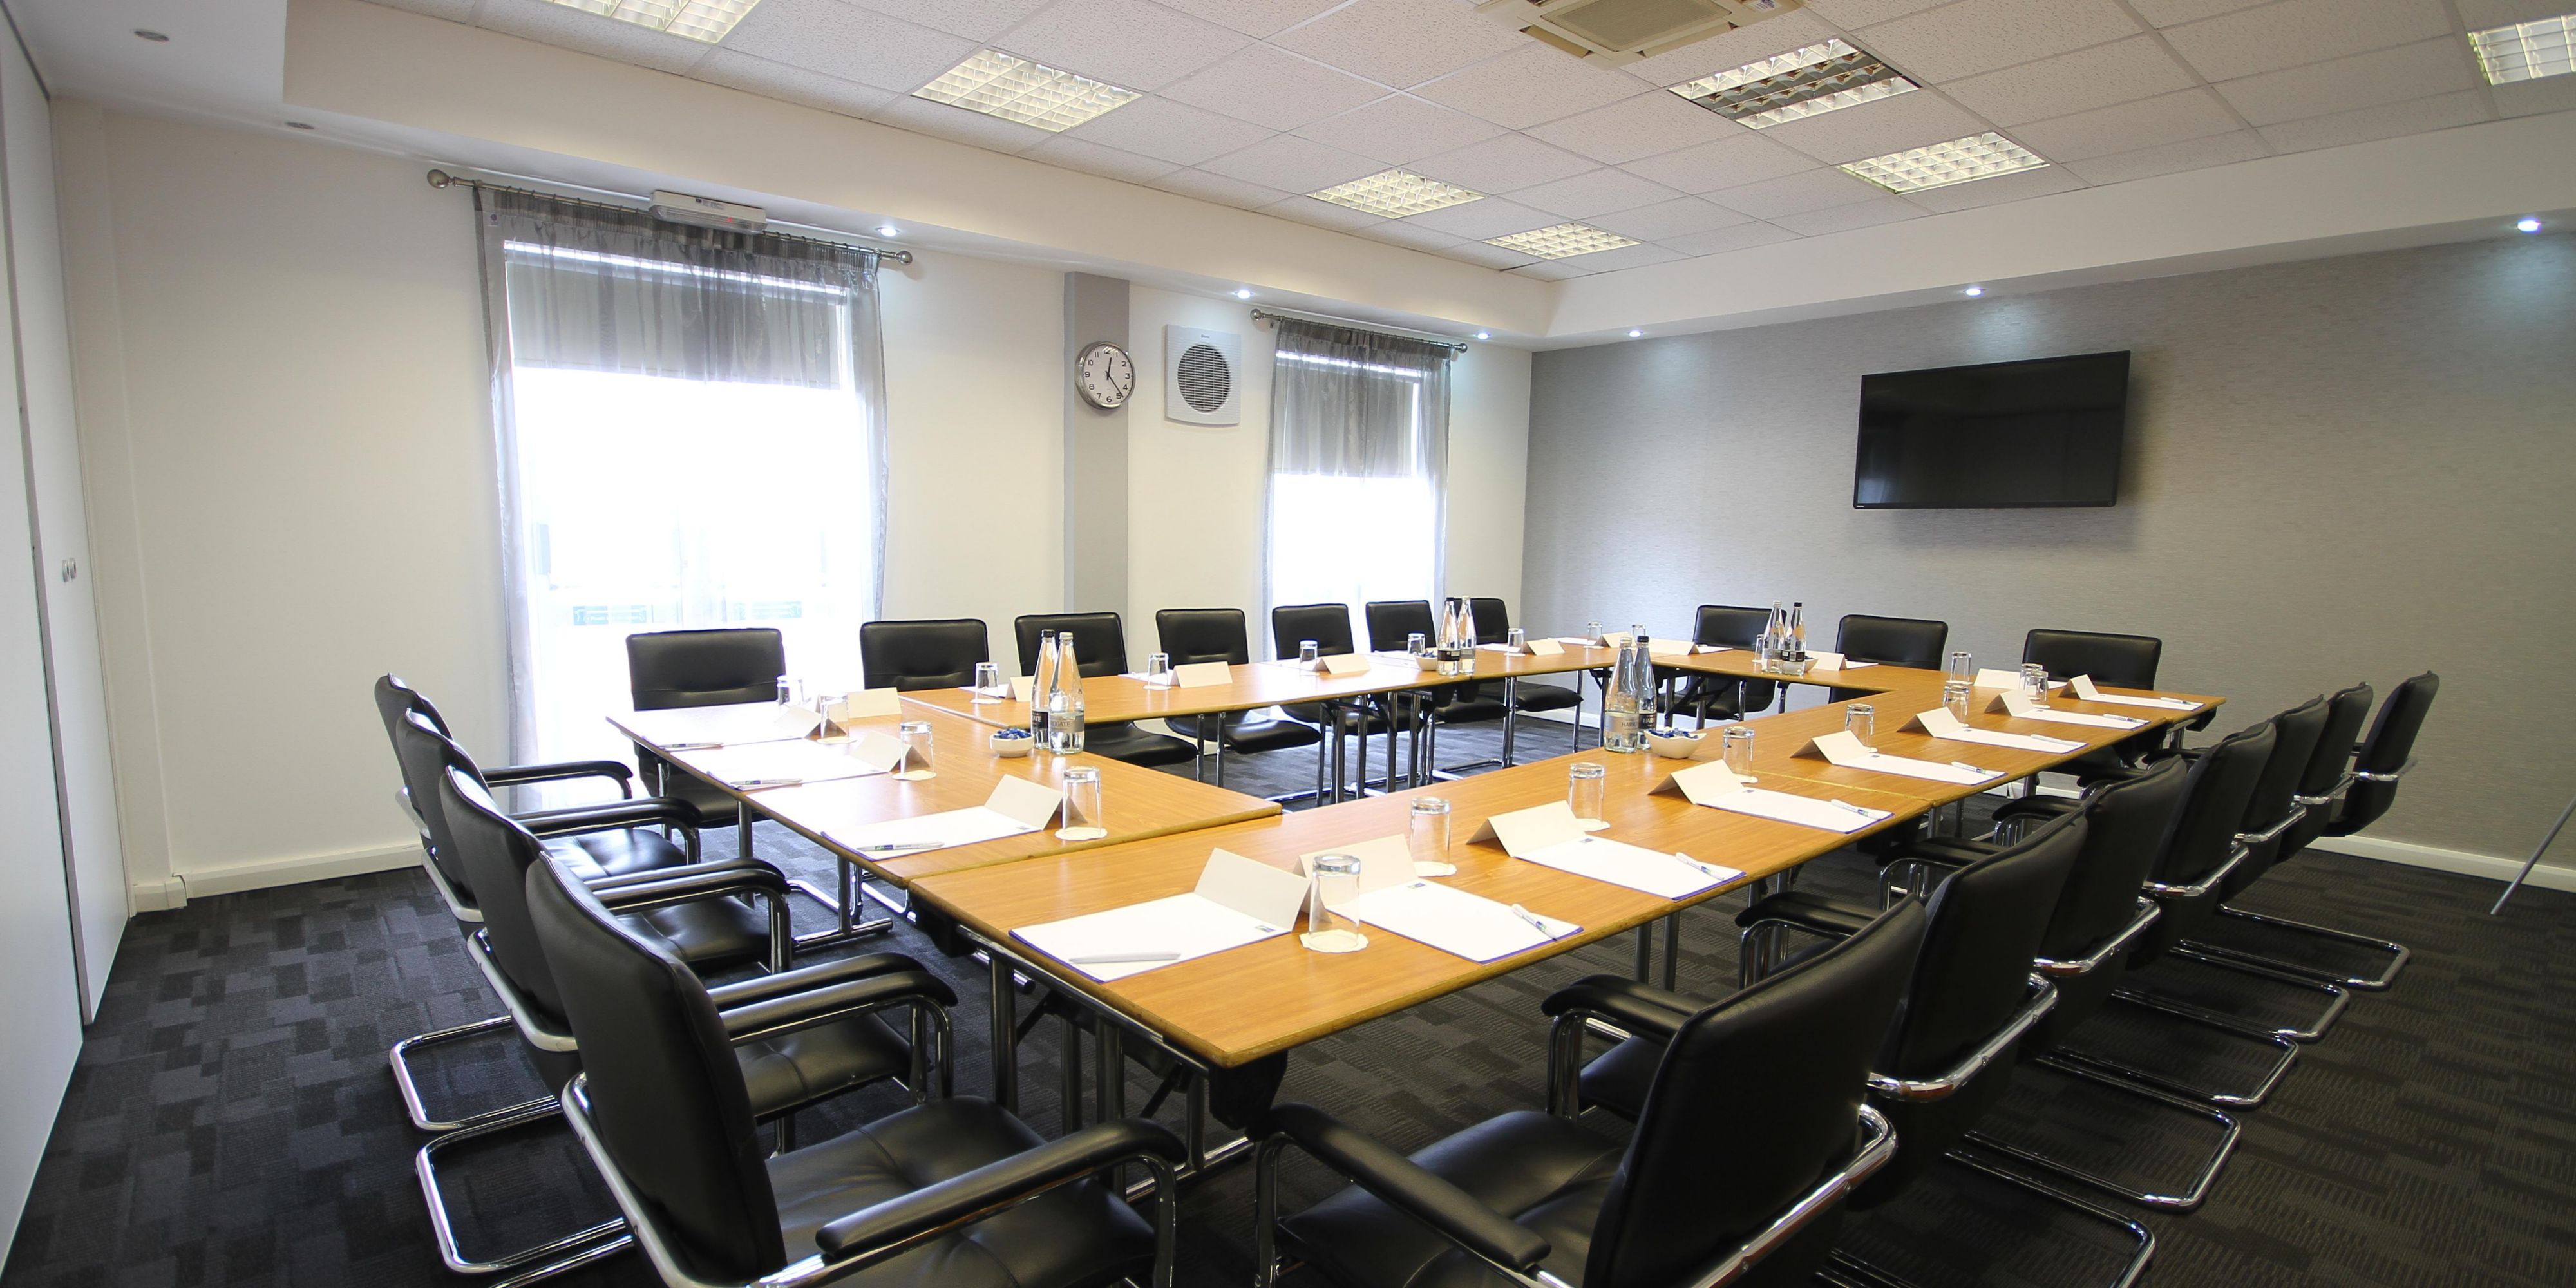 Two naturally lit meeting rooms available for hire. Conference facilities for up to 40 delegates when combined.
Both located on our ground floor with air conditioning and natural daylight. 
Room hire includes bottled water. Tea and coffee facilities available and buffets when requested in advance. 
Complimentary flip charts and stationary.